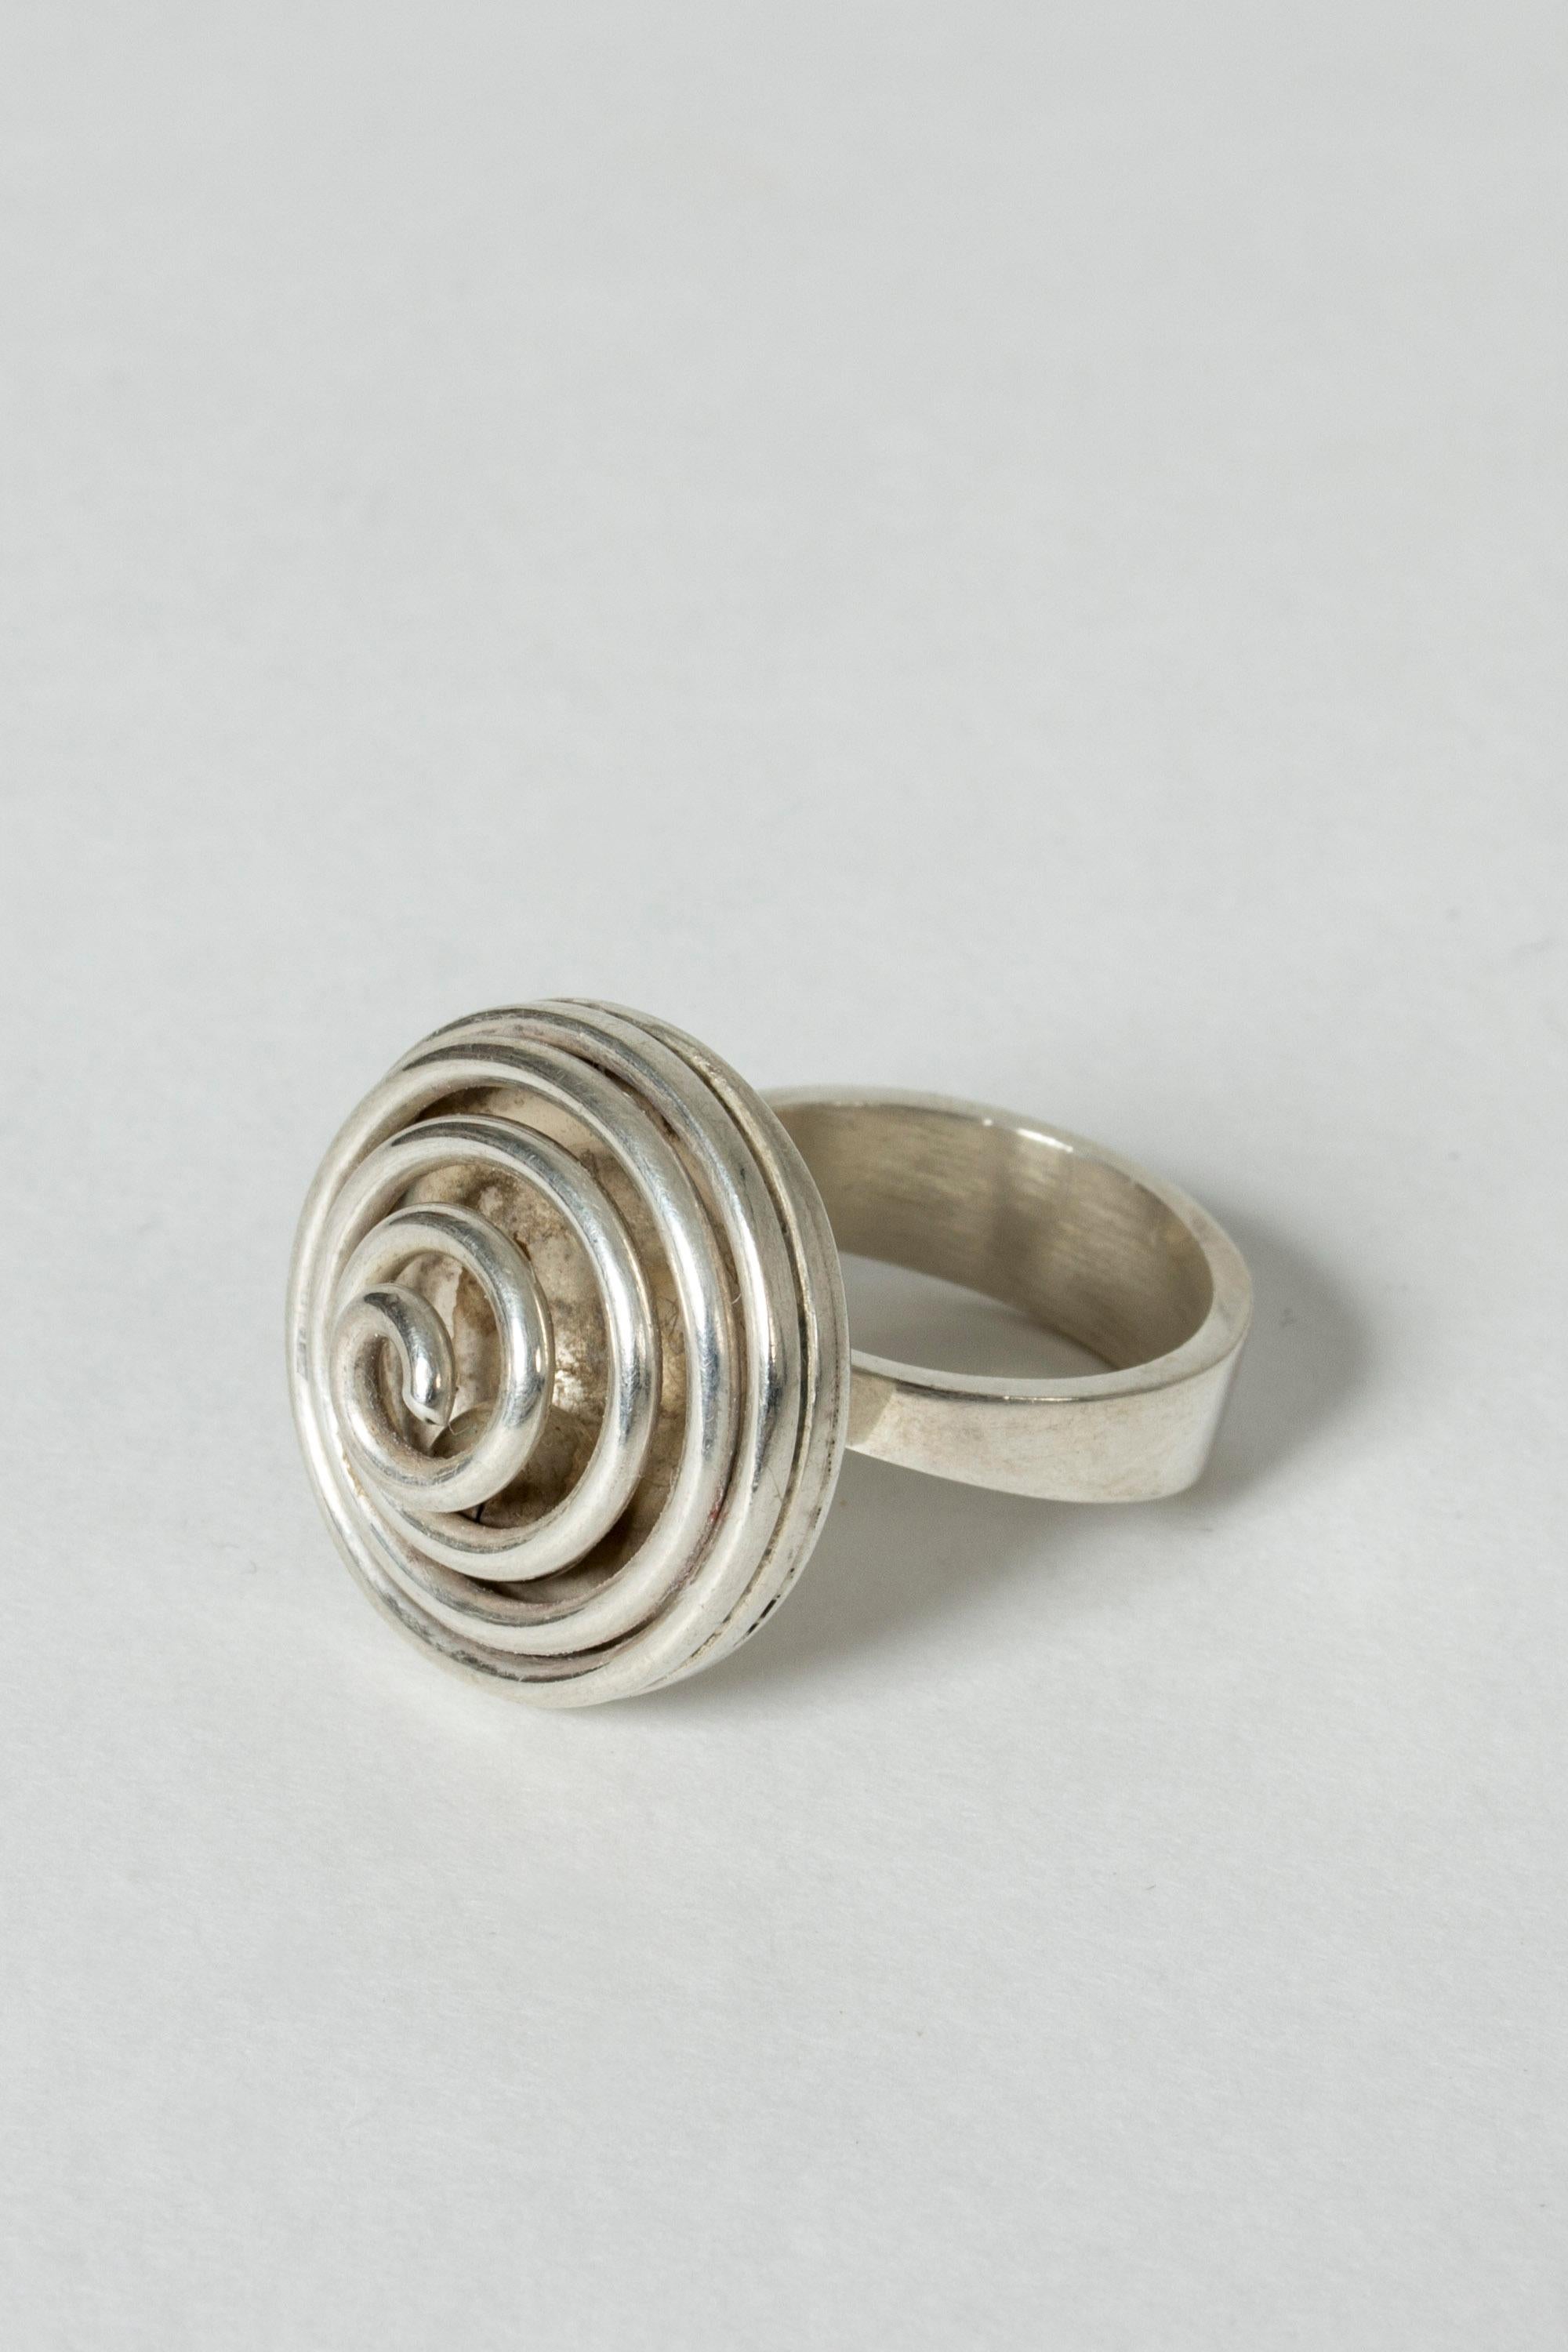 Silver Spiral Ring with Ball from Kaplans, Sweden, 1967 1